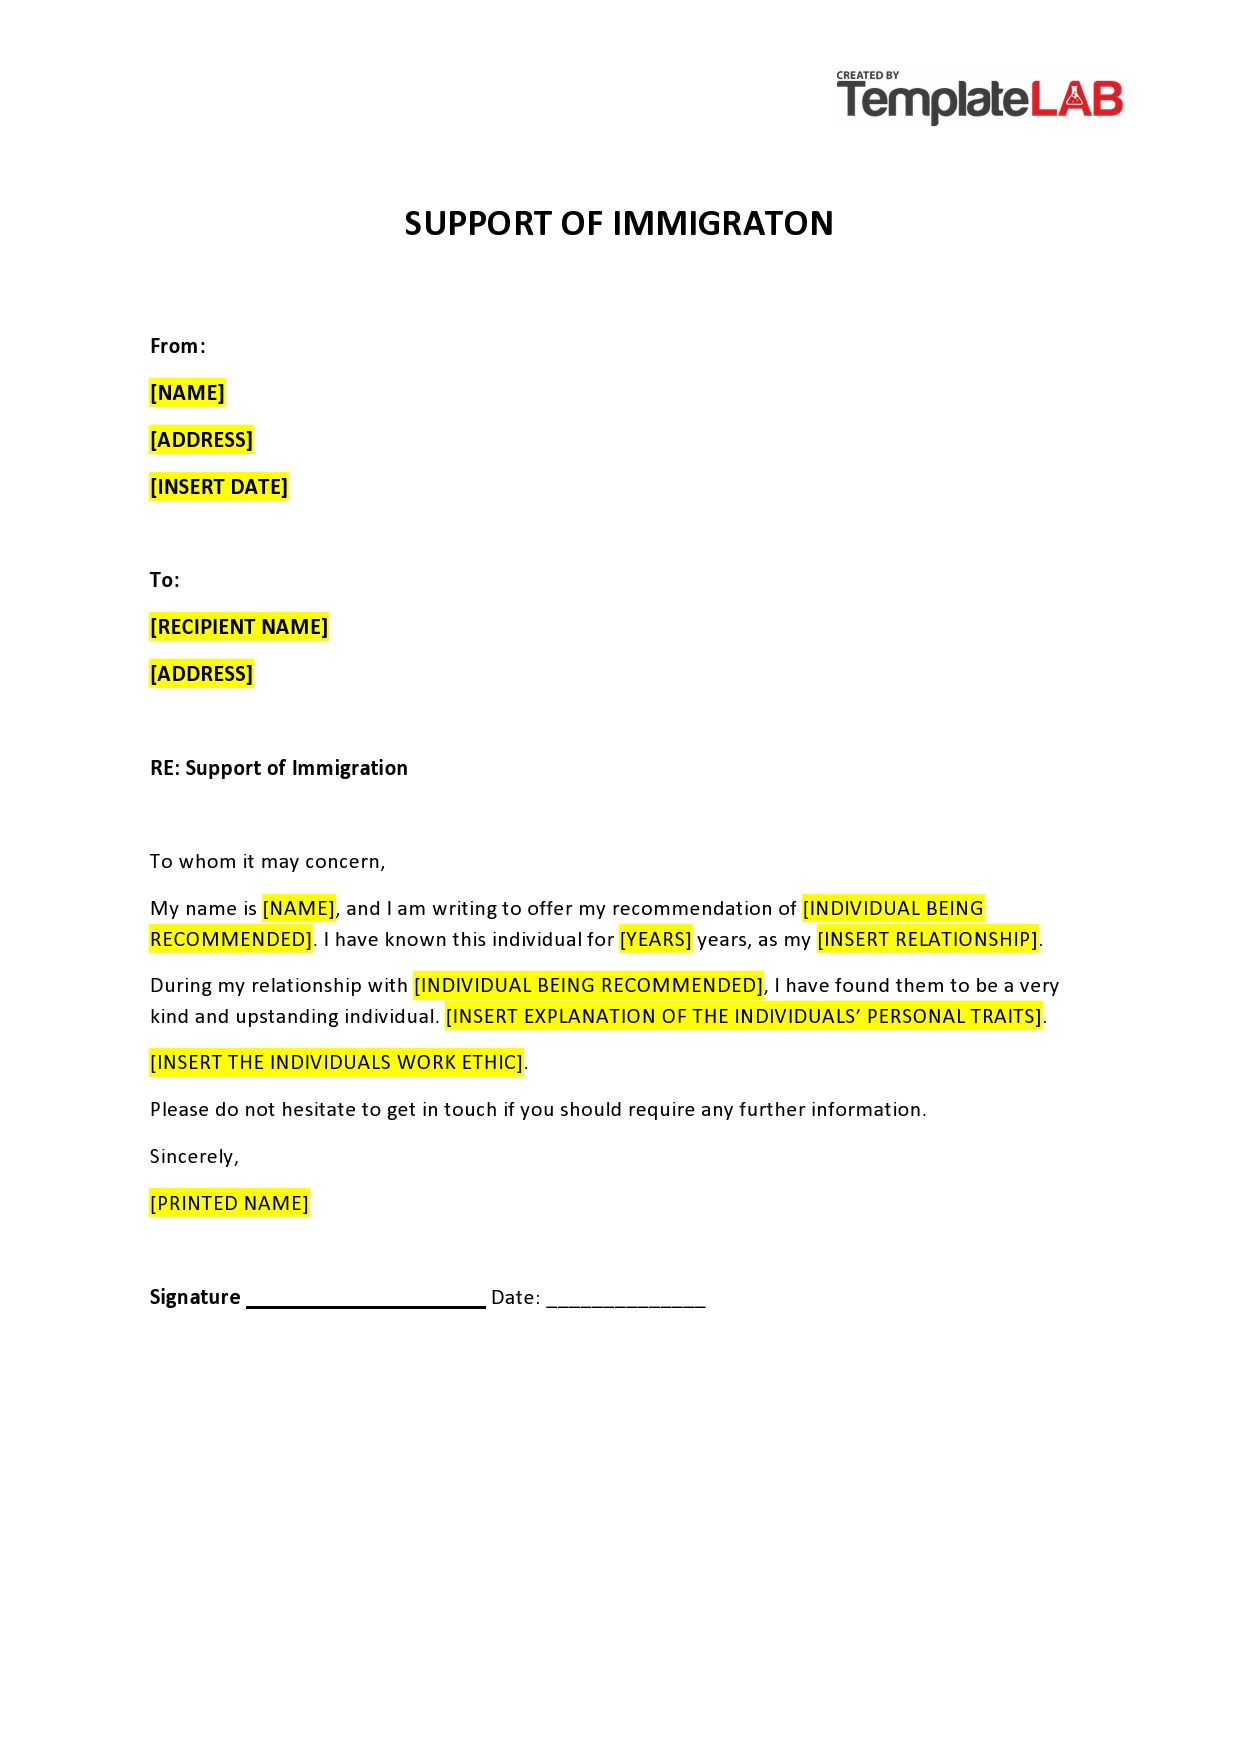 Appointment Letter Examples - 79+ Samples in PDF, Google Docs, Pages, DOC